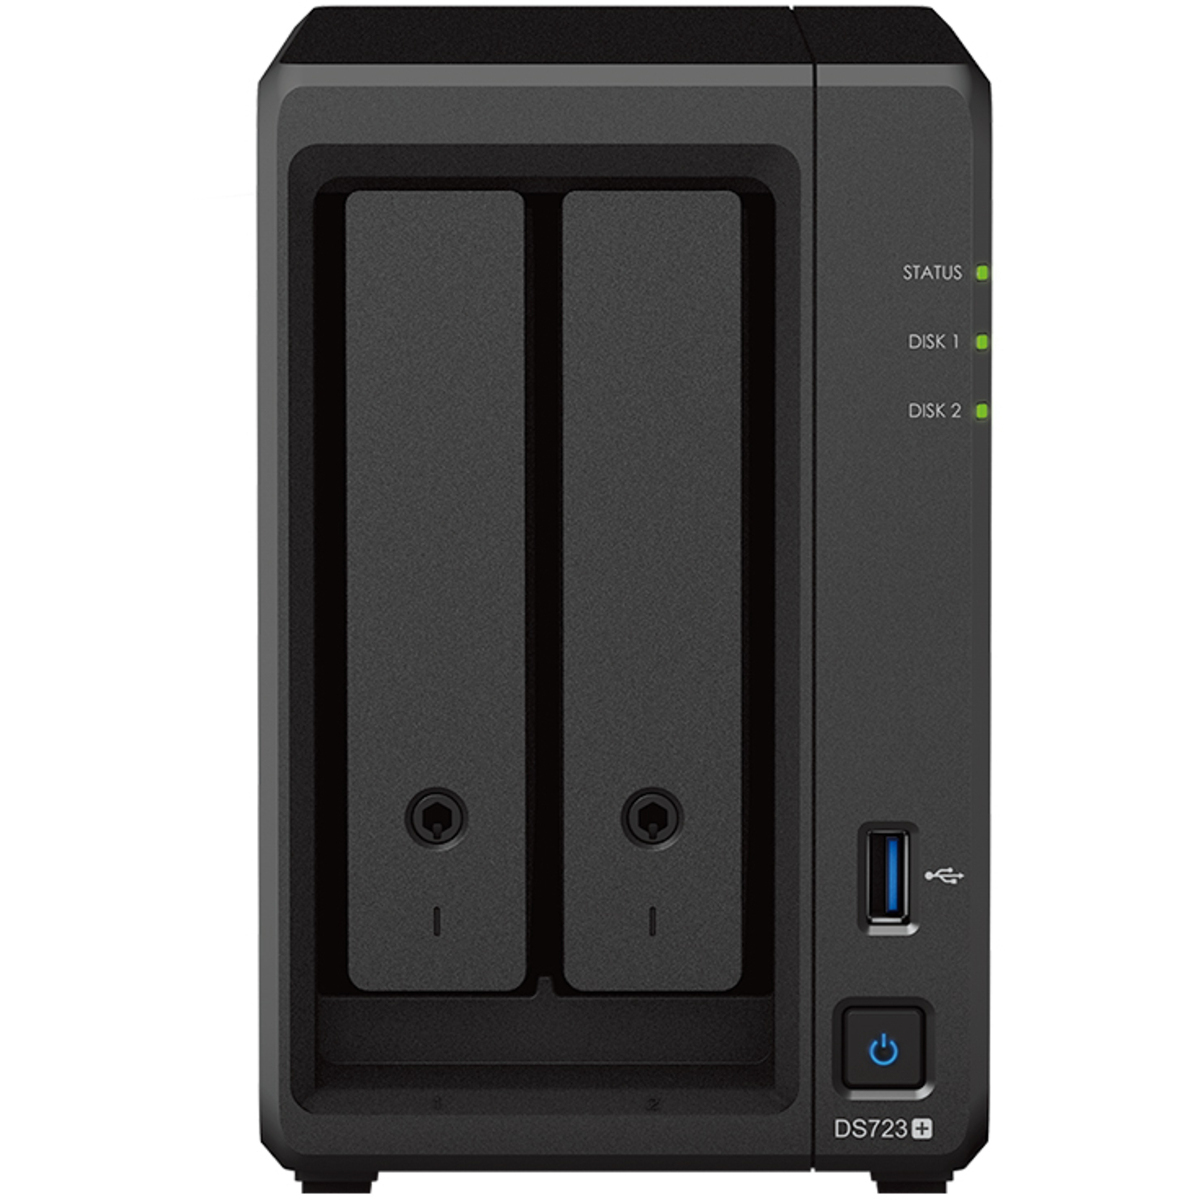 Synology DS723+ NAS - Network Attached Storage Device Burn-In Tested Configurations